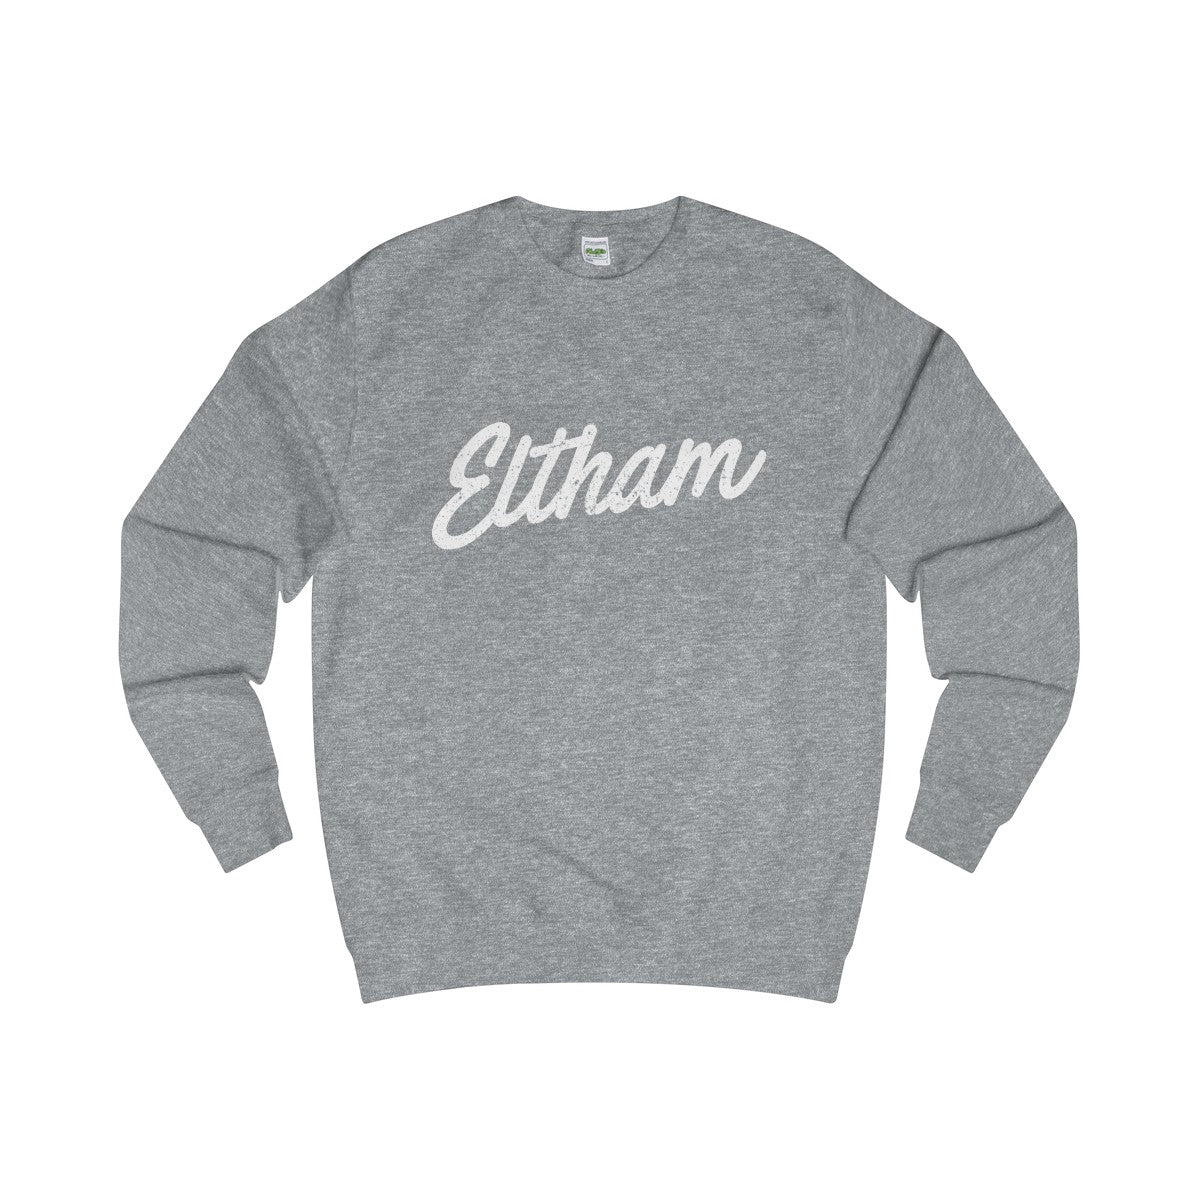 Eltham Scripted Sweater